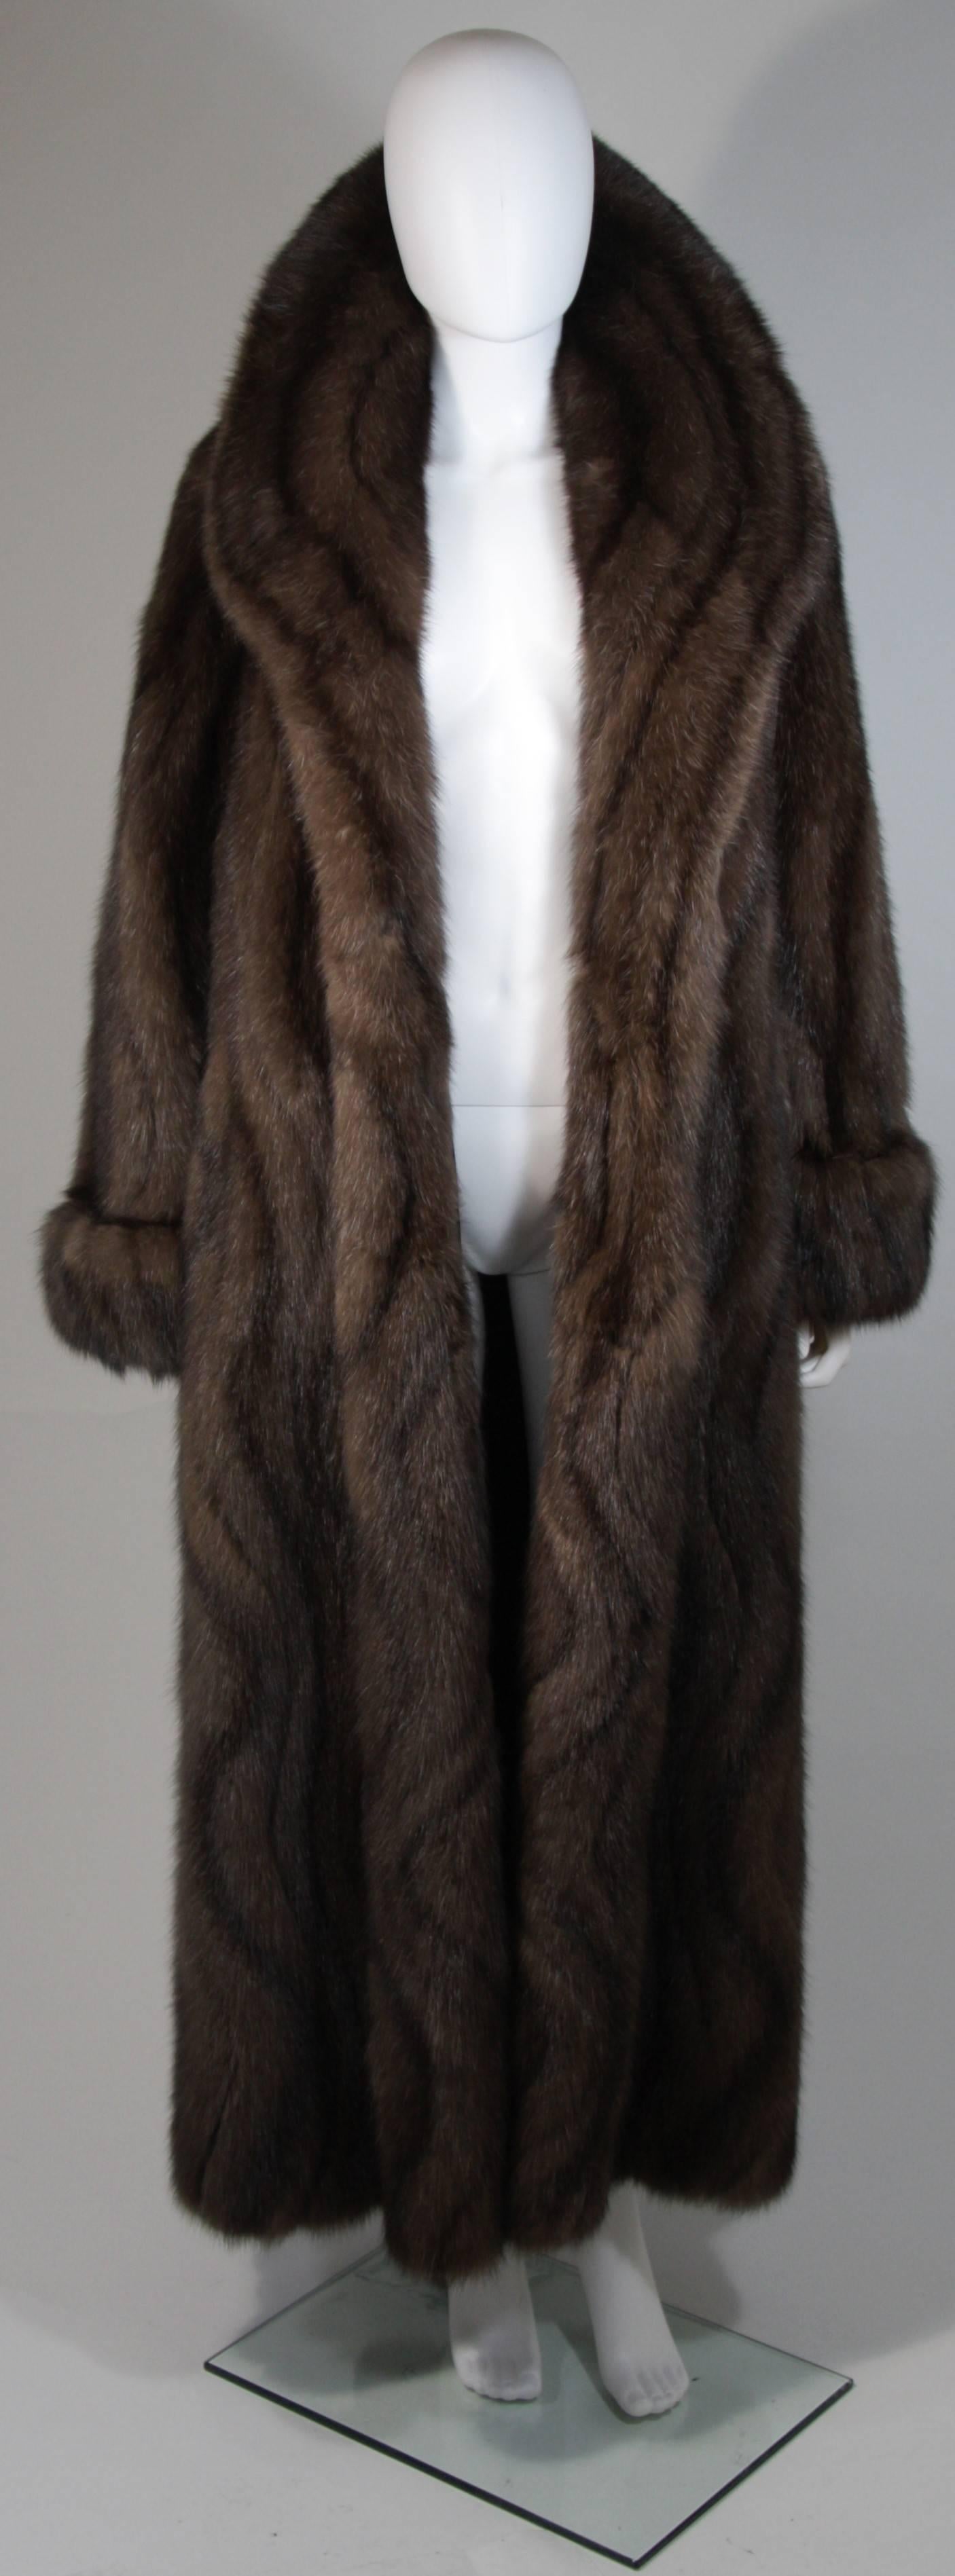 Black Russian Sable Coat with Wave Pattern Excellent Condition Retail $300, 000.00